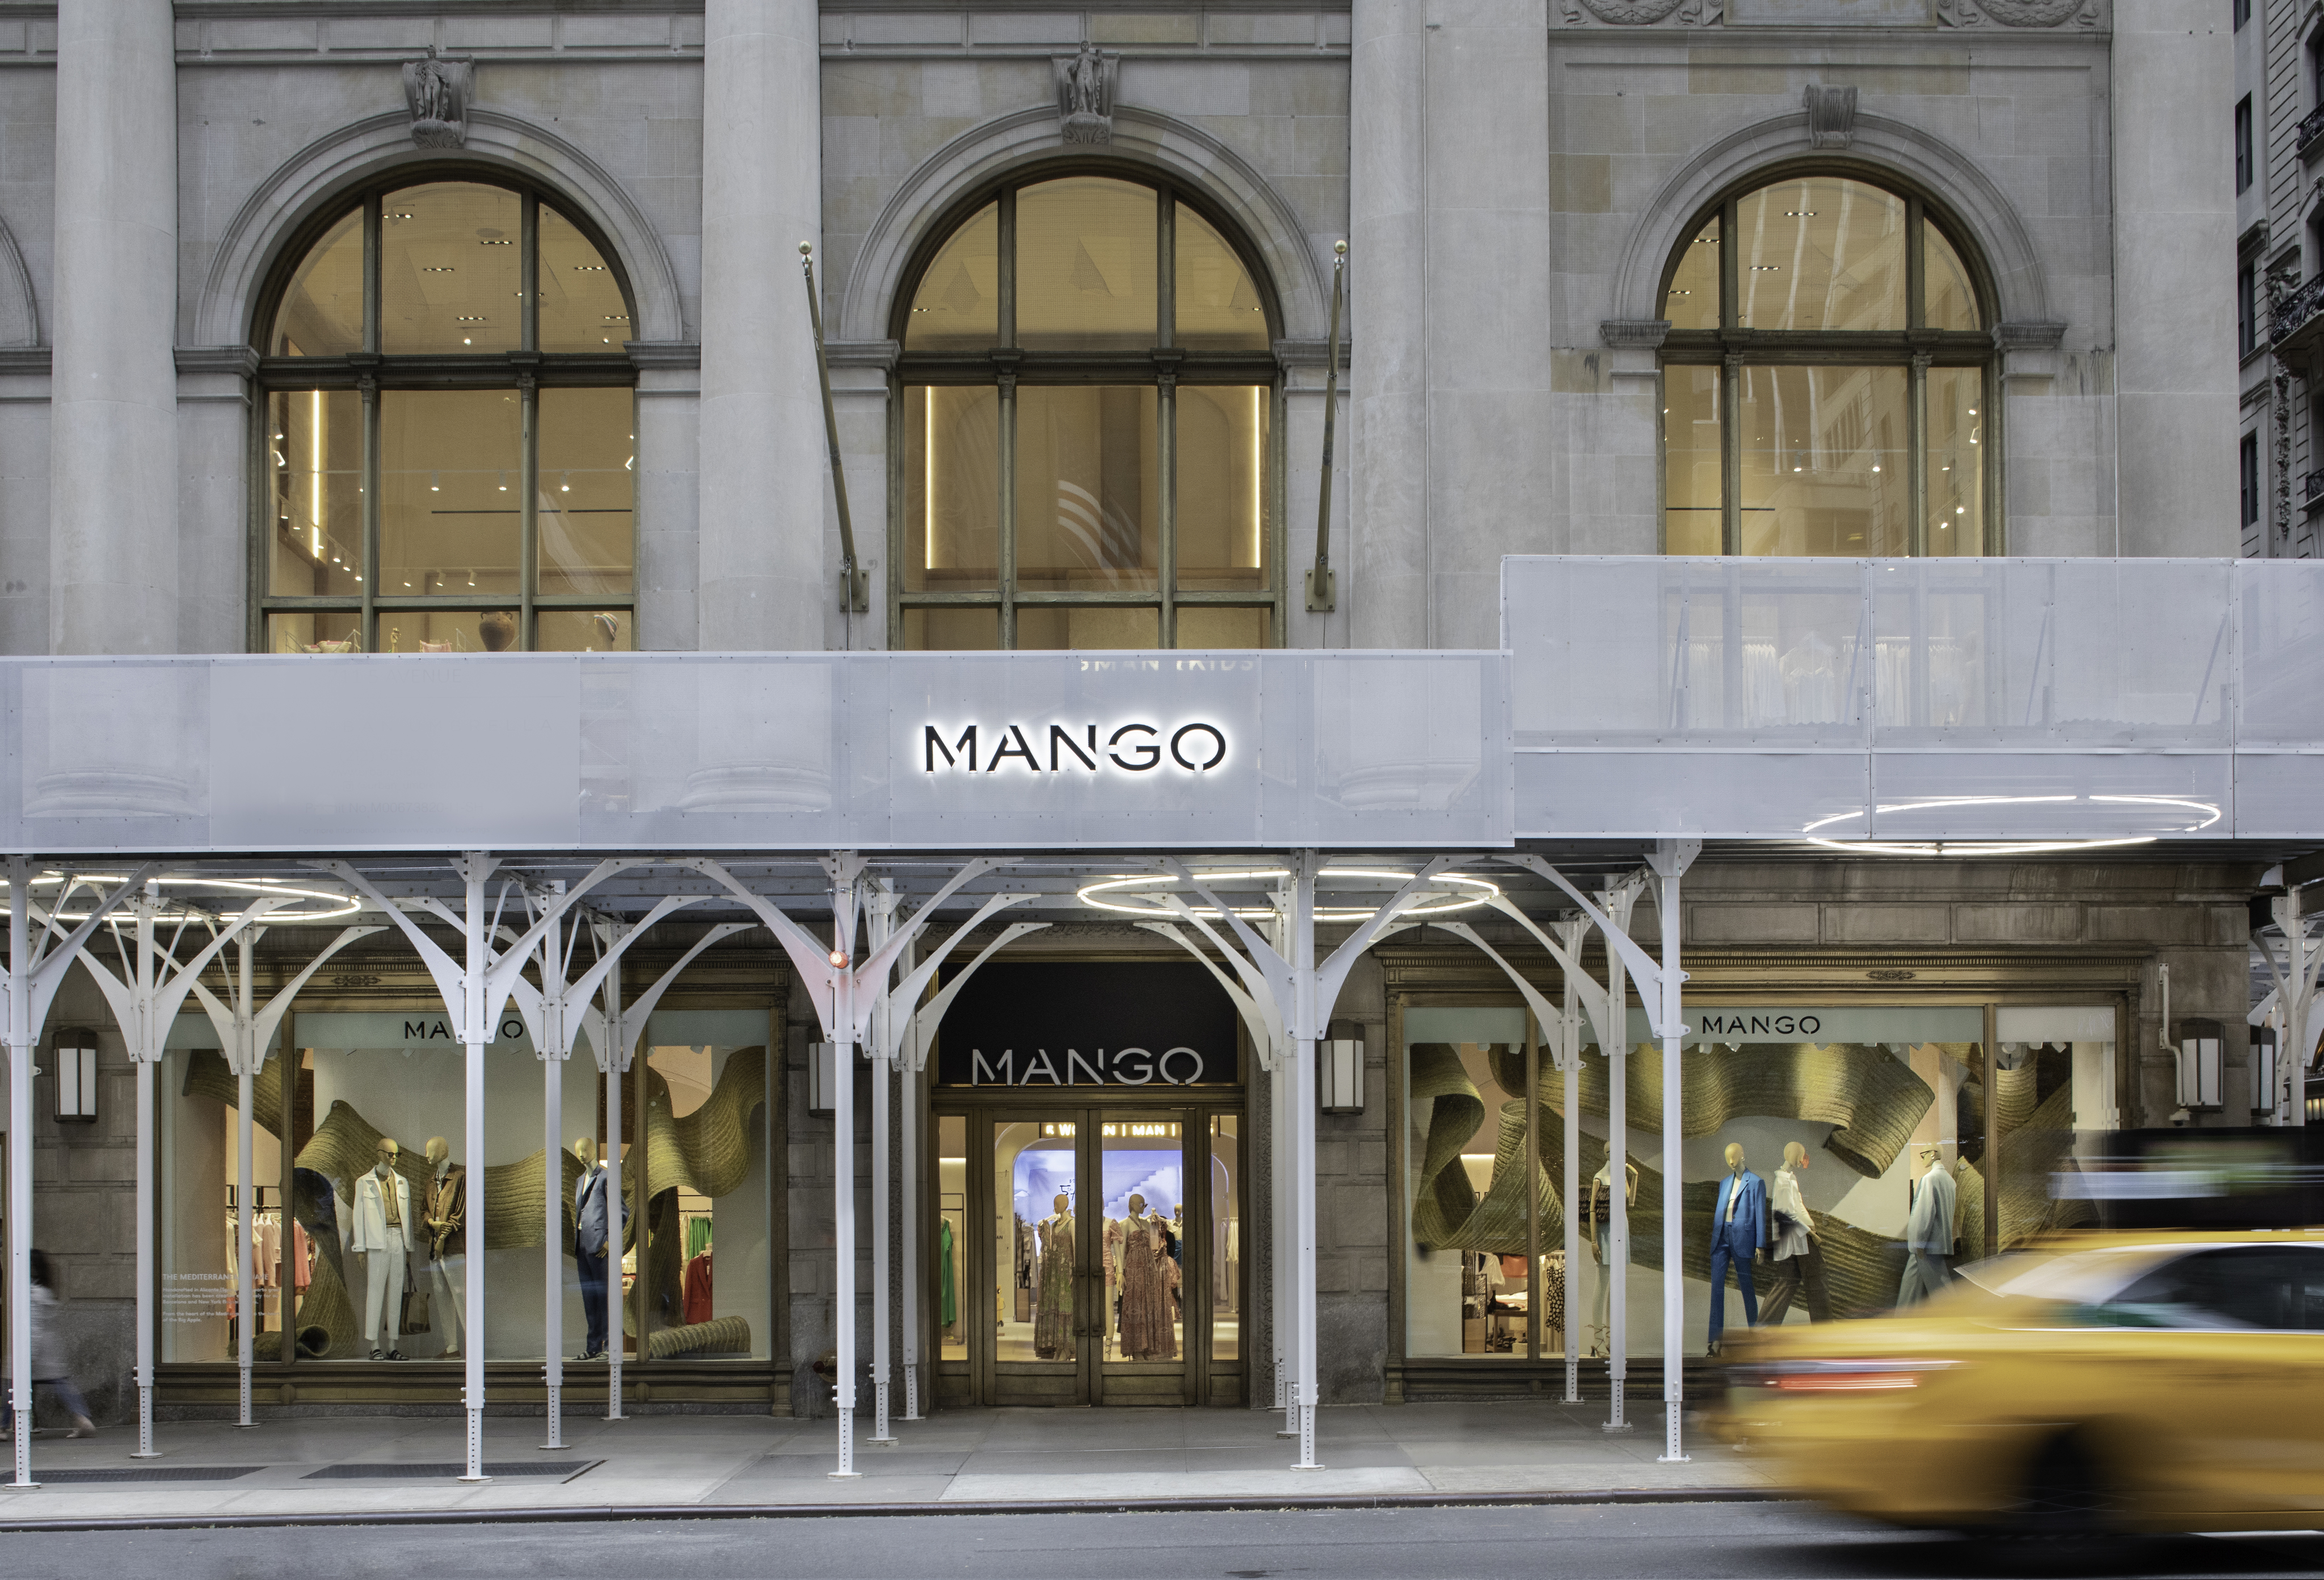 Look inside Mango in Galleria Dallas as Spanish retailer opens its first  U.S. stores